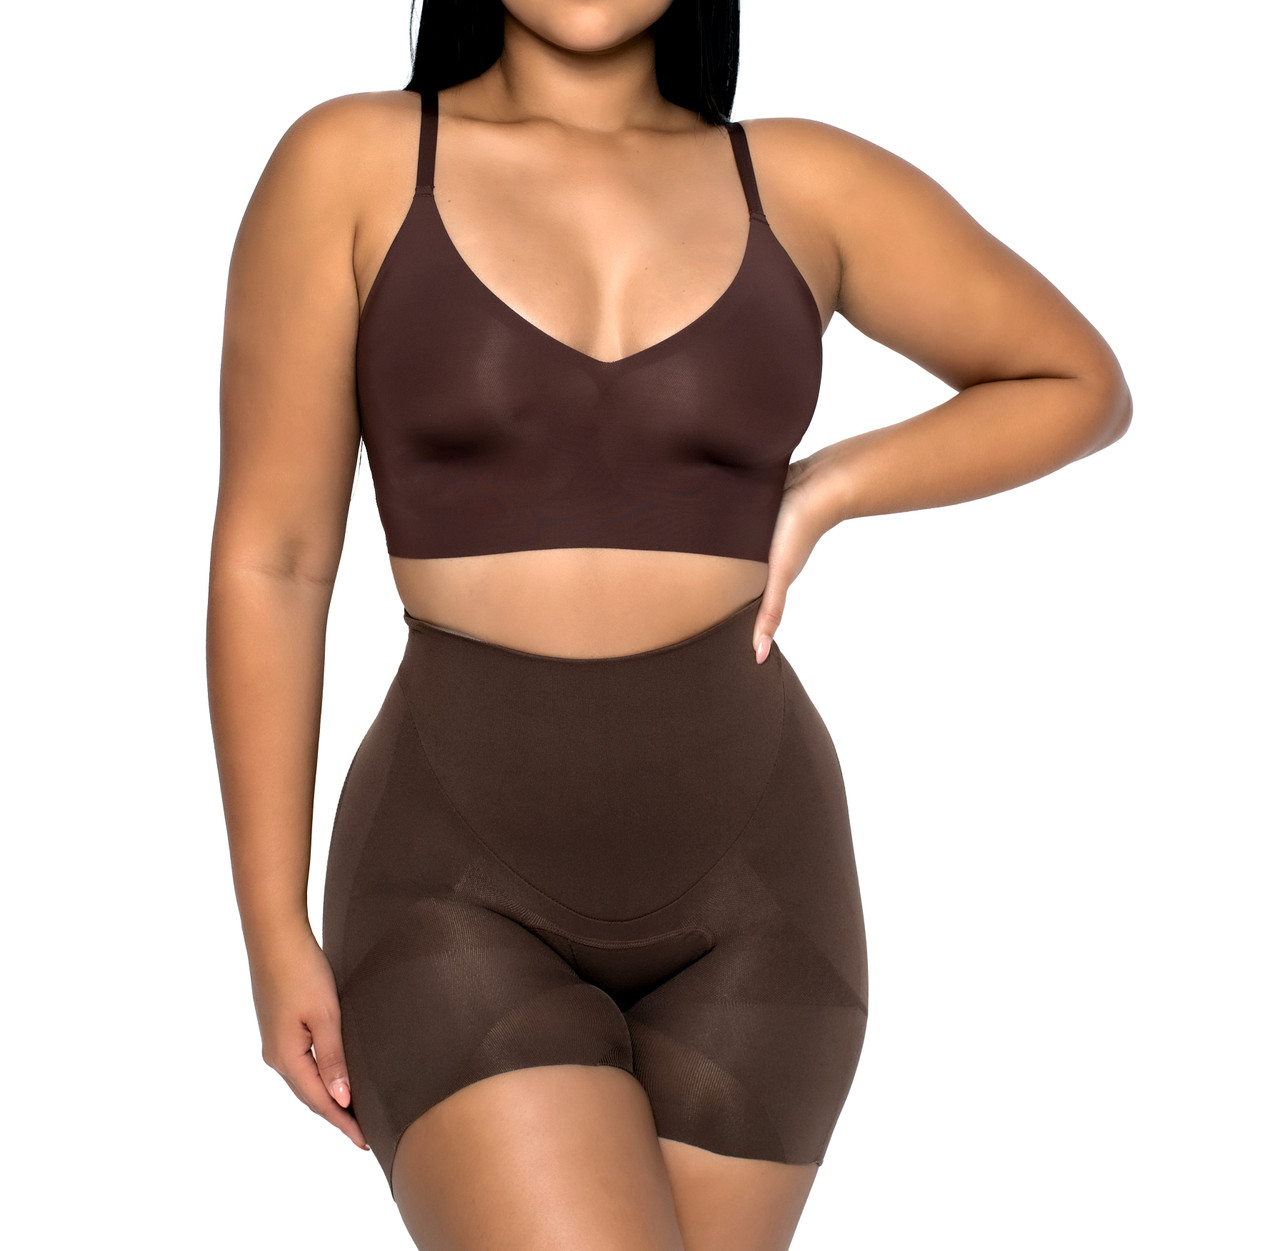 Shop Yahaira - The seamless invisible body shaper that shapes your body  without flattening your butt & attaches to any bra. 💕 If you want to know  your size please write your